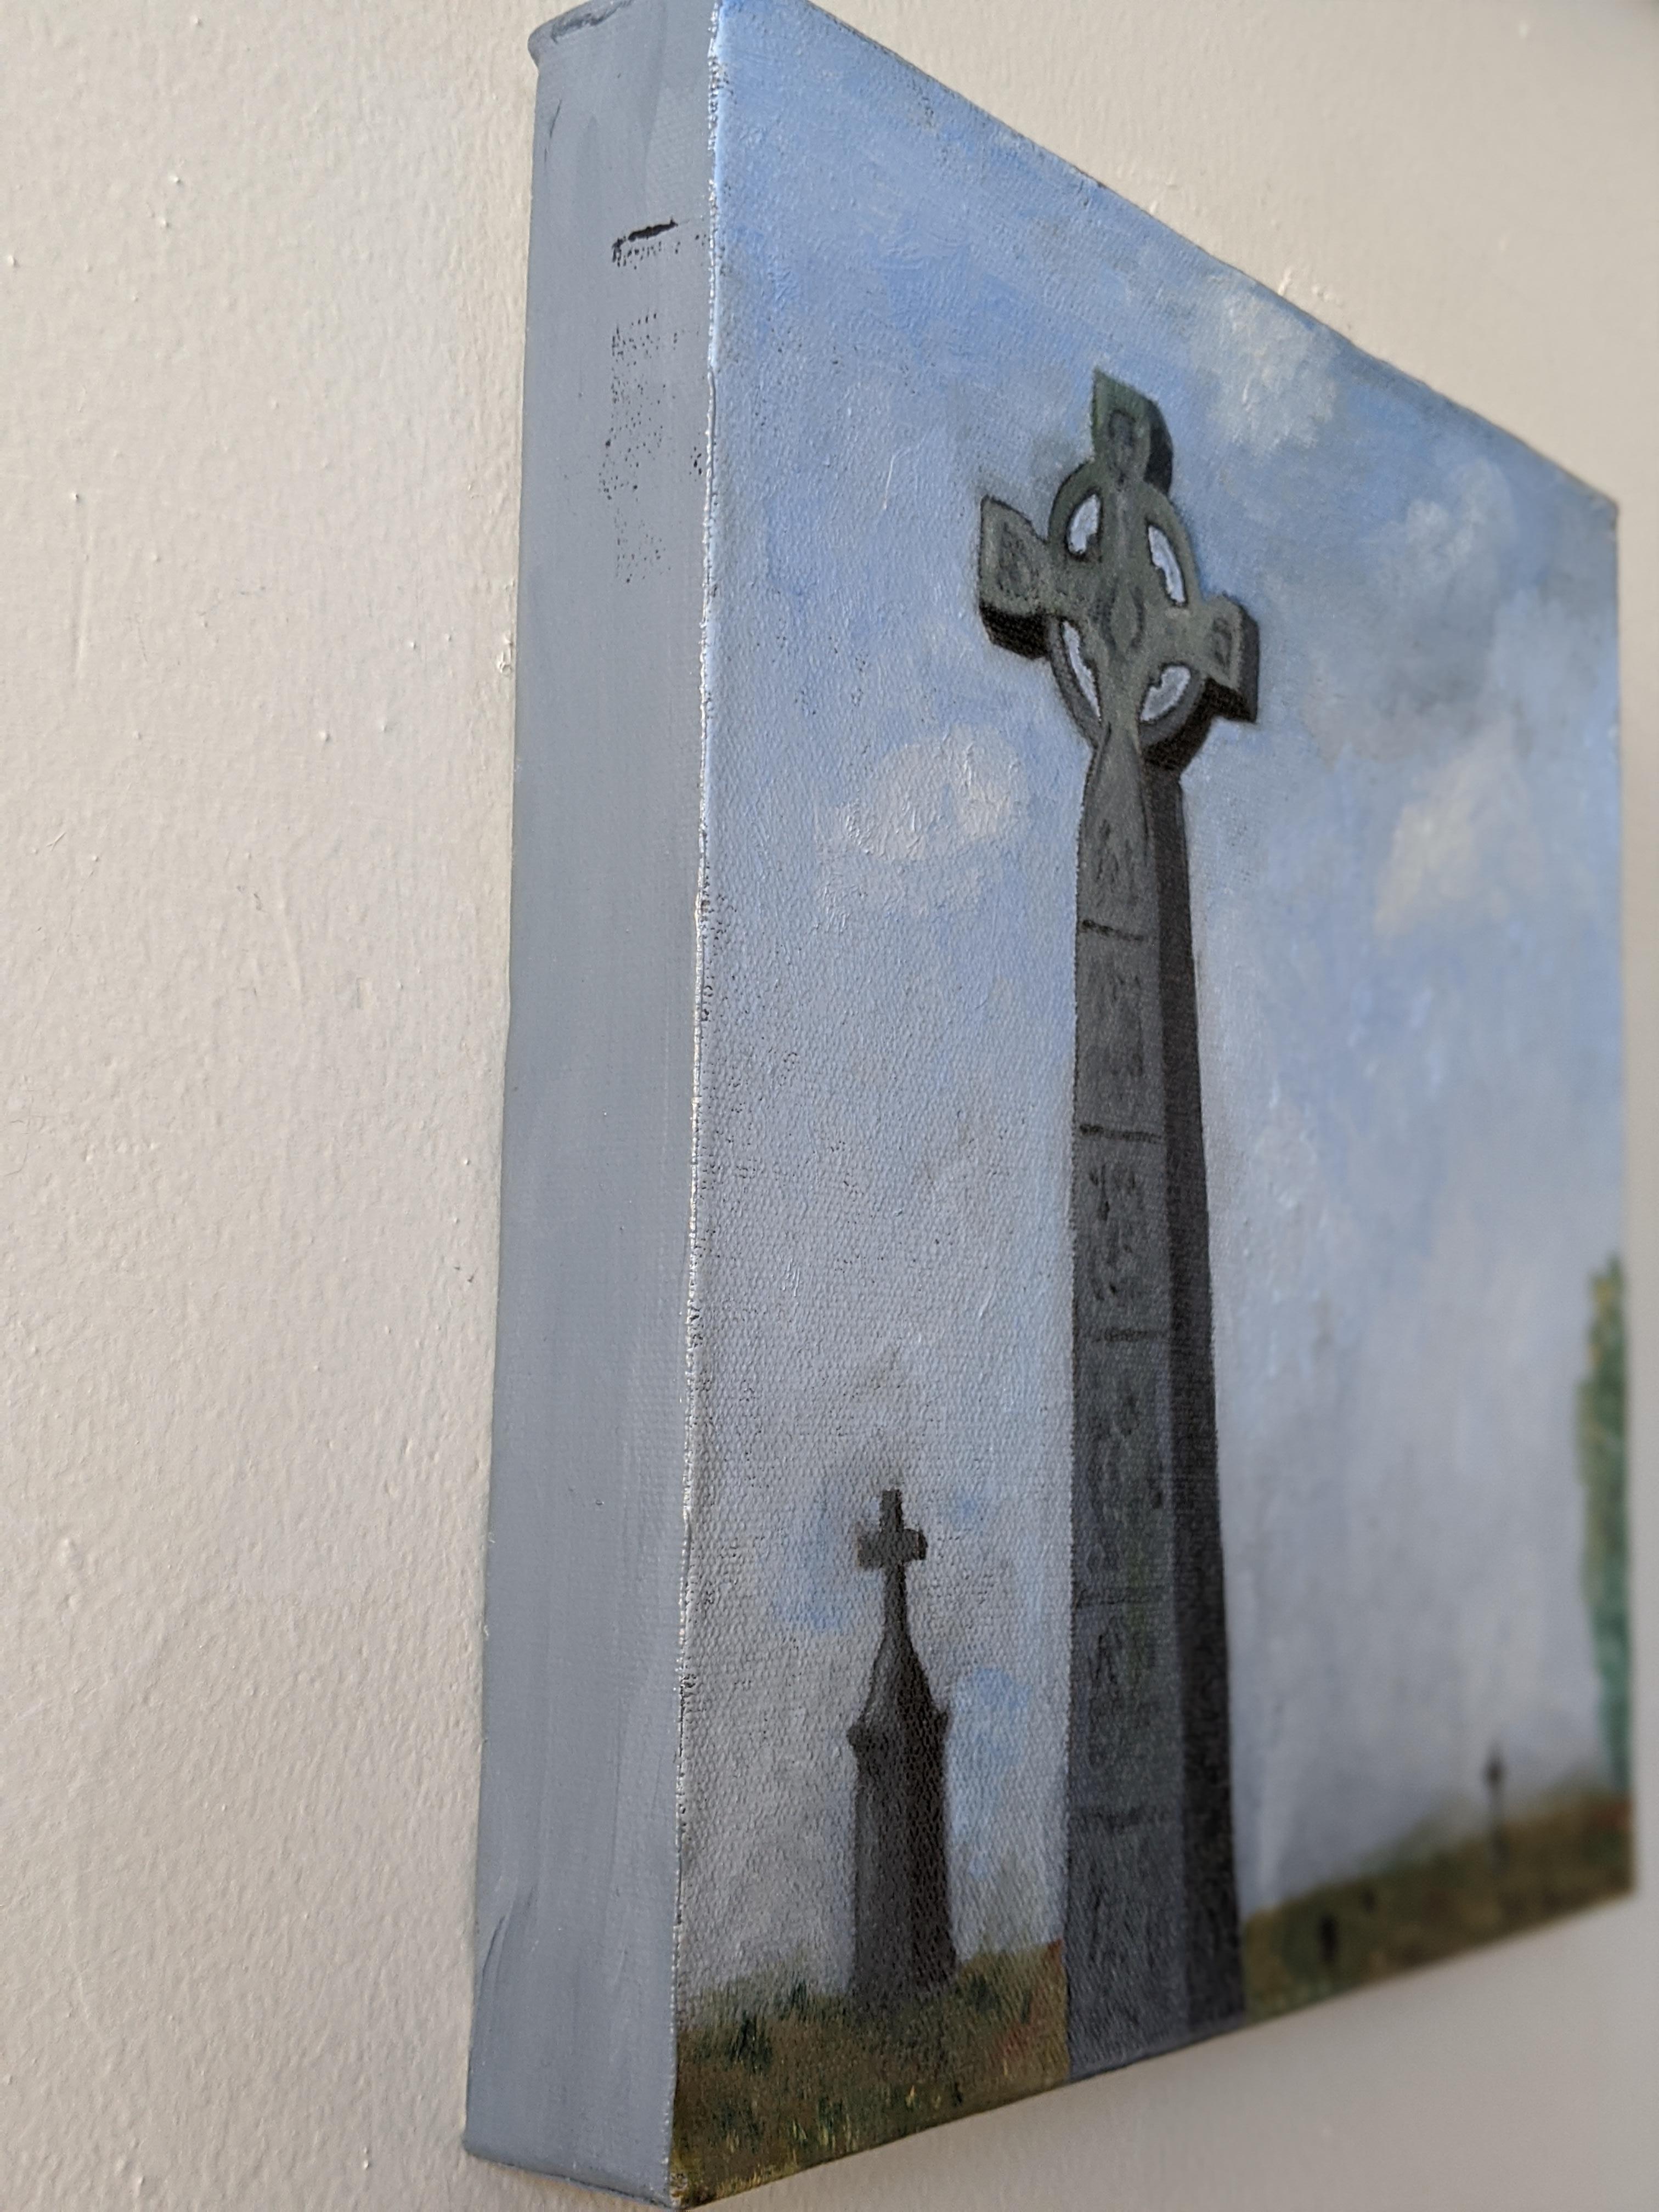 This oil on canvas painting features a view of the Clonmacnoise monastery in County Offaly, Ireland. Clonmacnoise means 